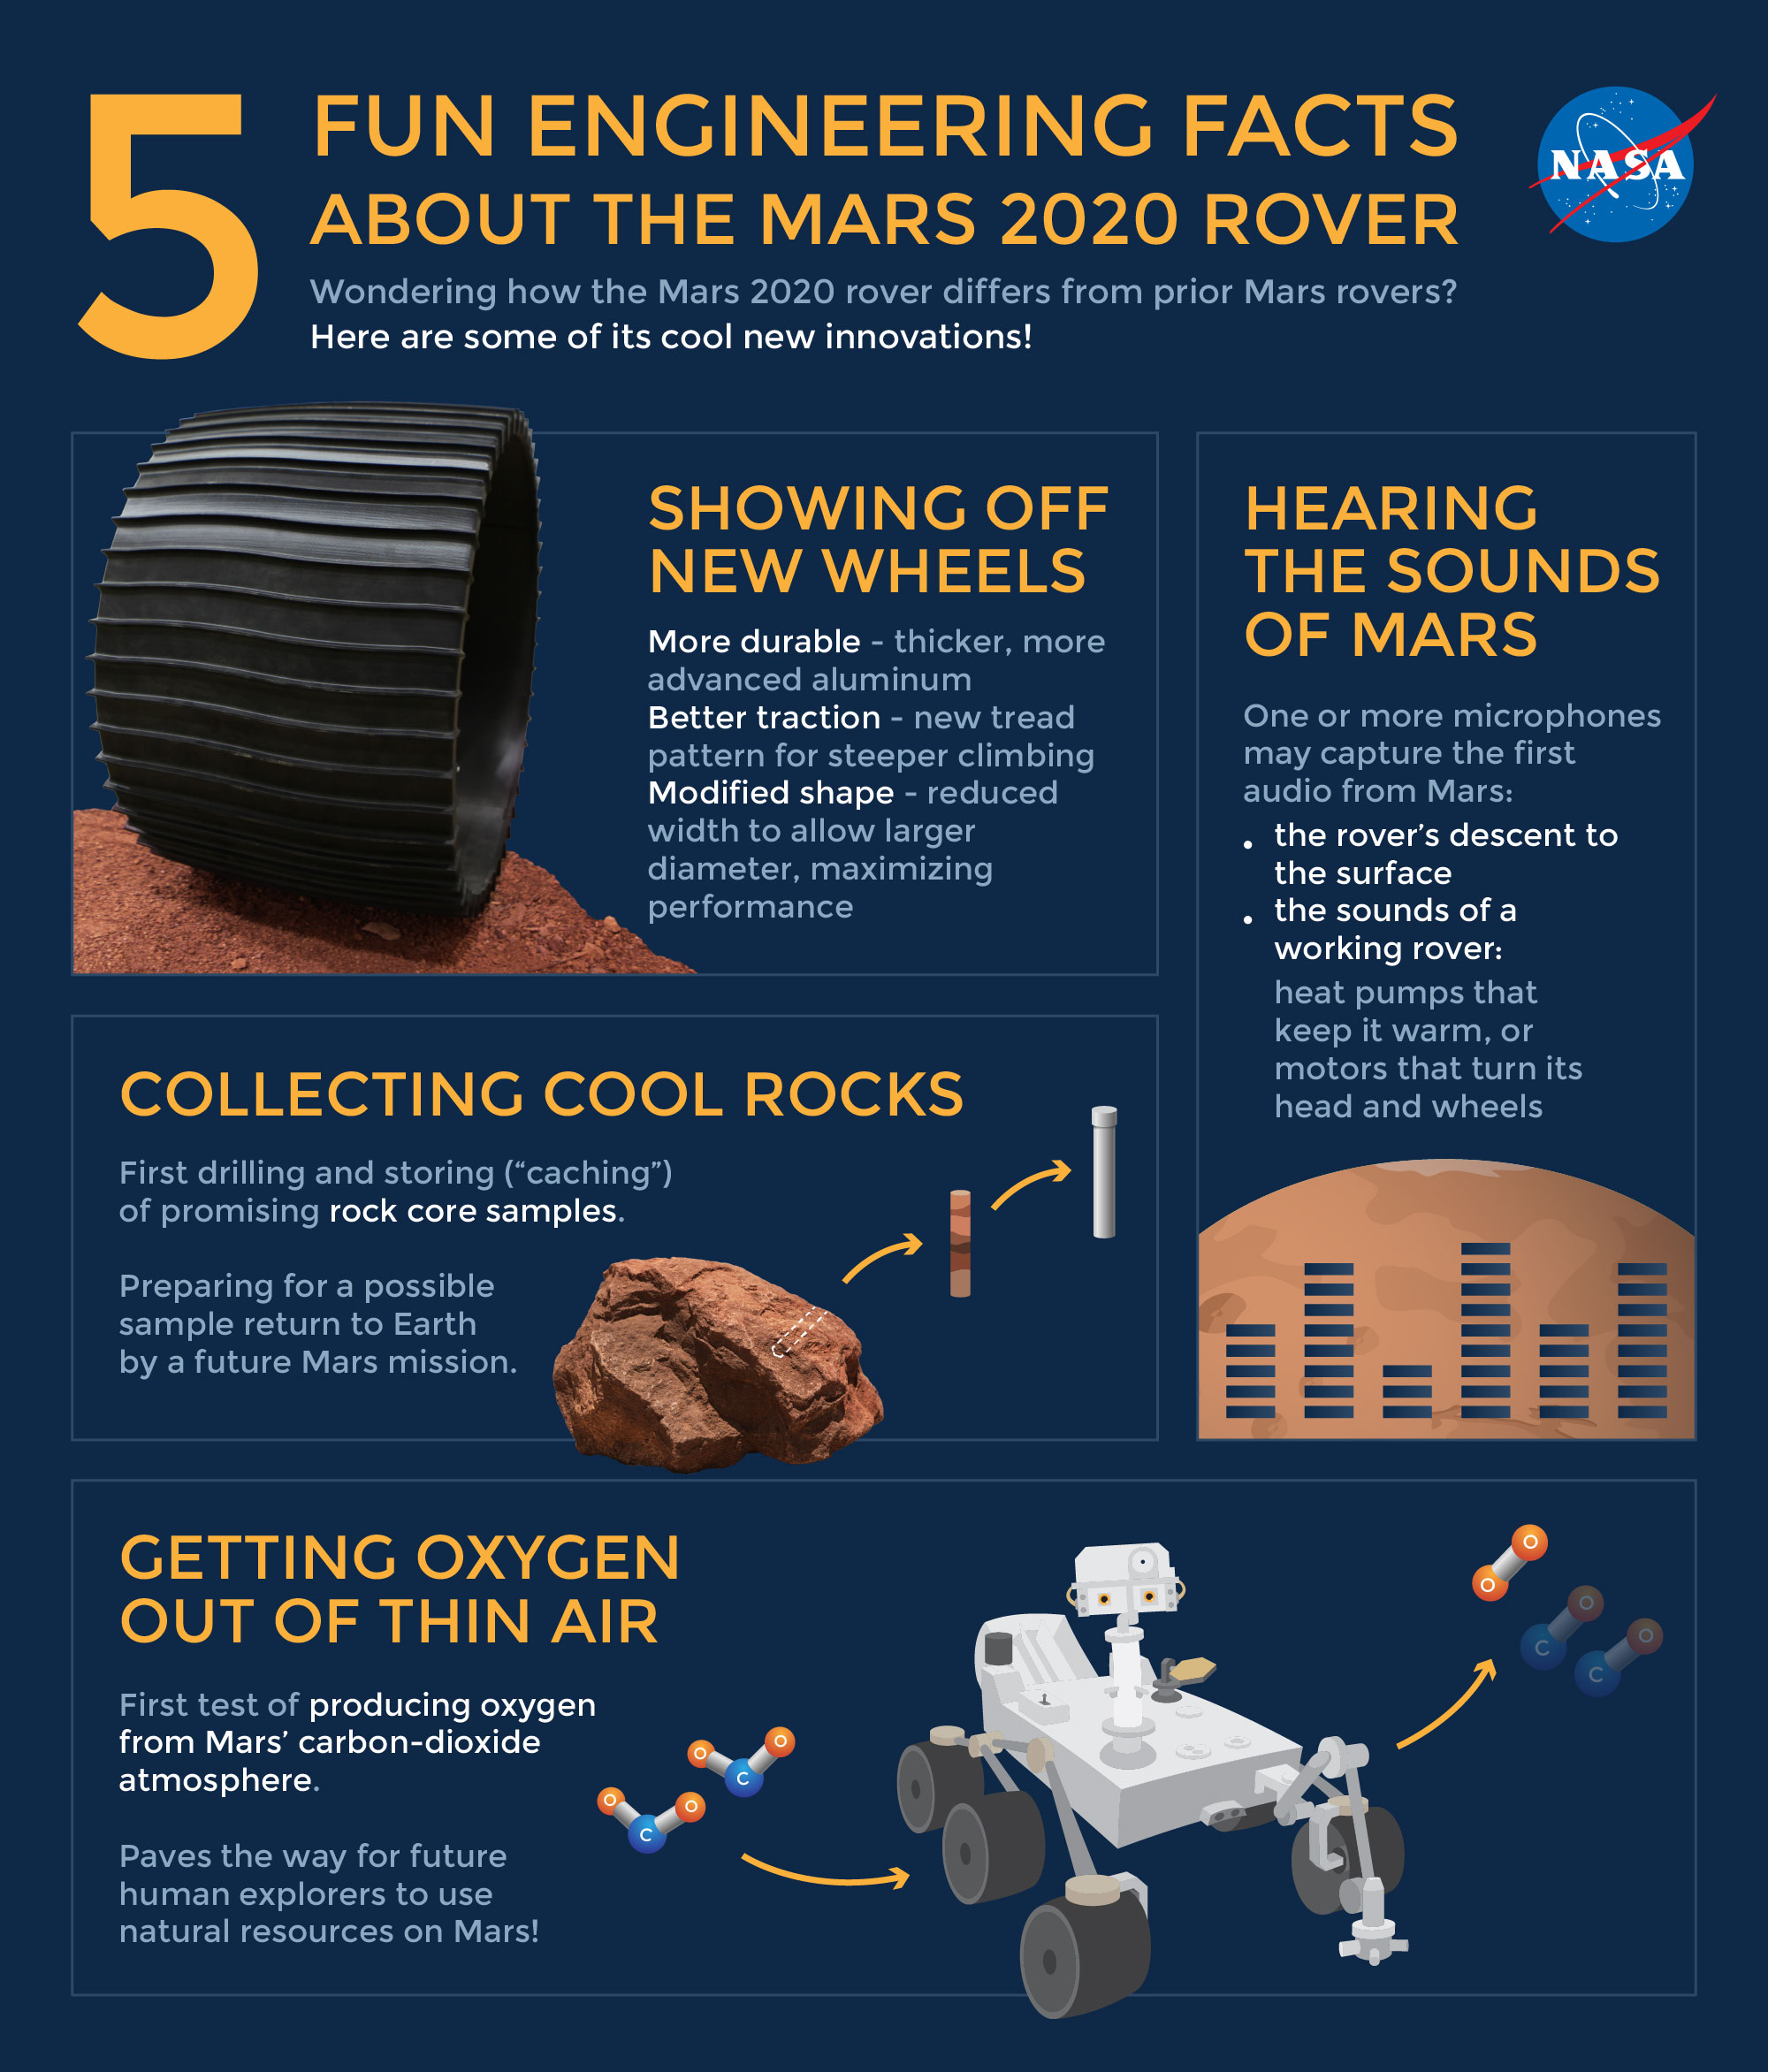 Infographic about the Mars 2020 rover engineering facts (new wheels, microphone, rock core sampling, producing oxygen from Mars' carbon-dioxide, and landing sensors).